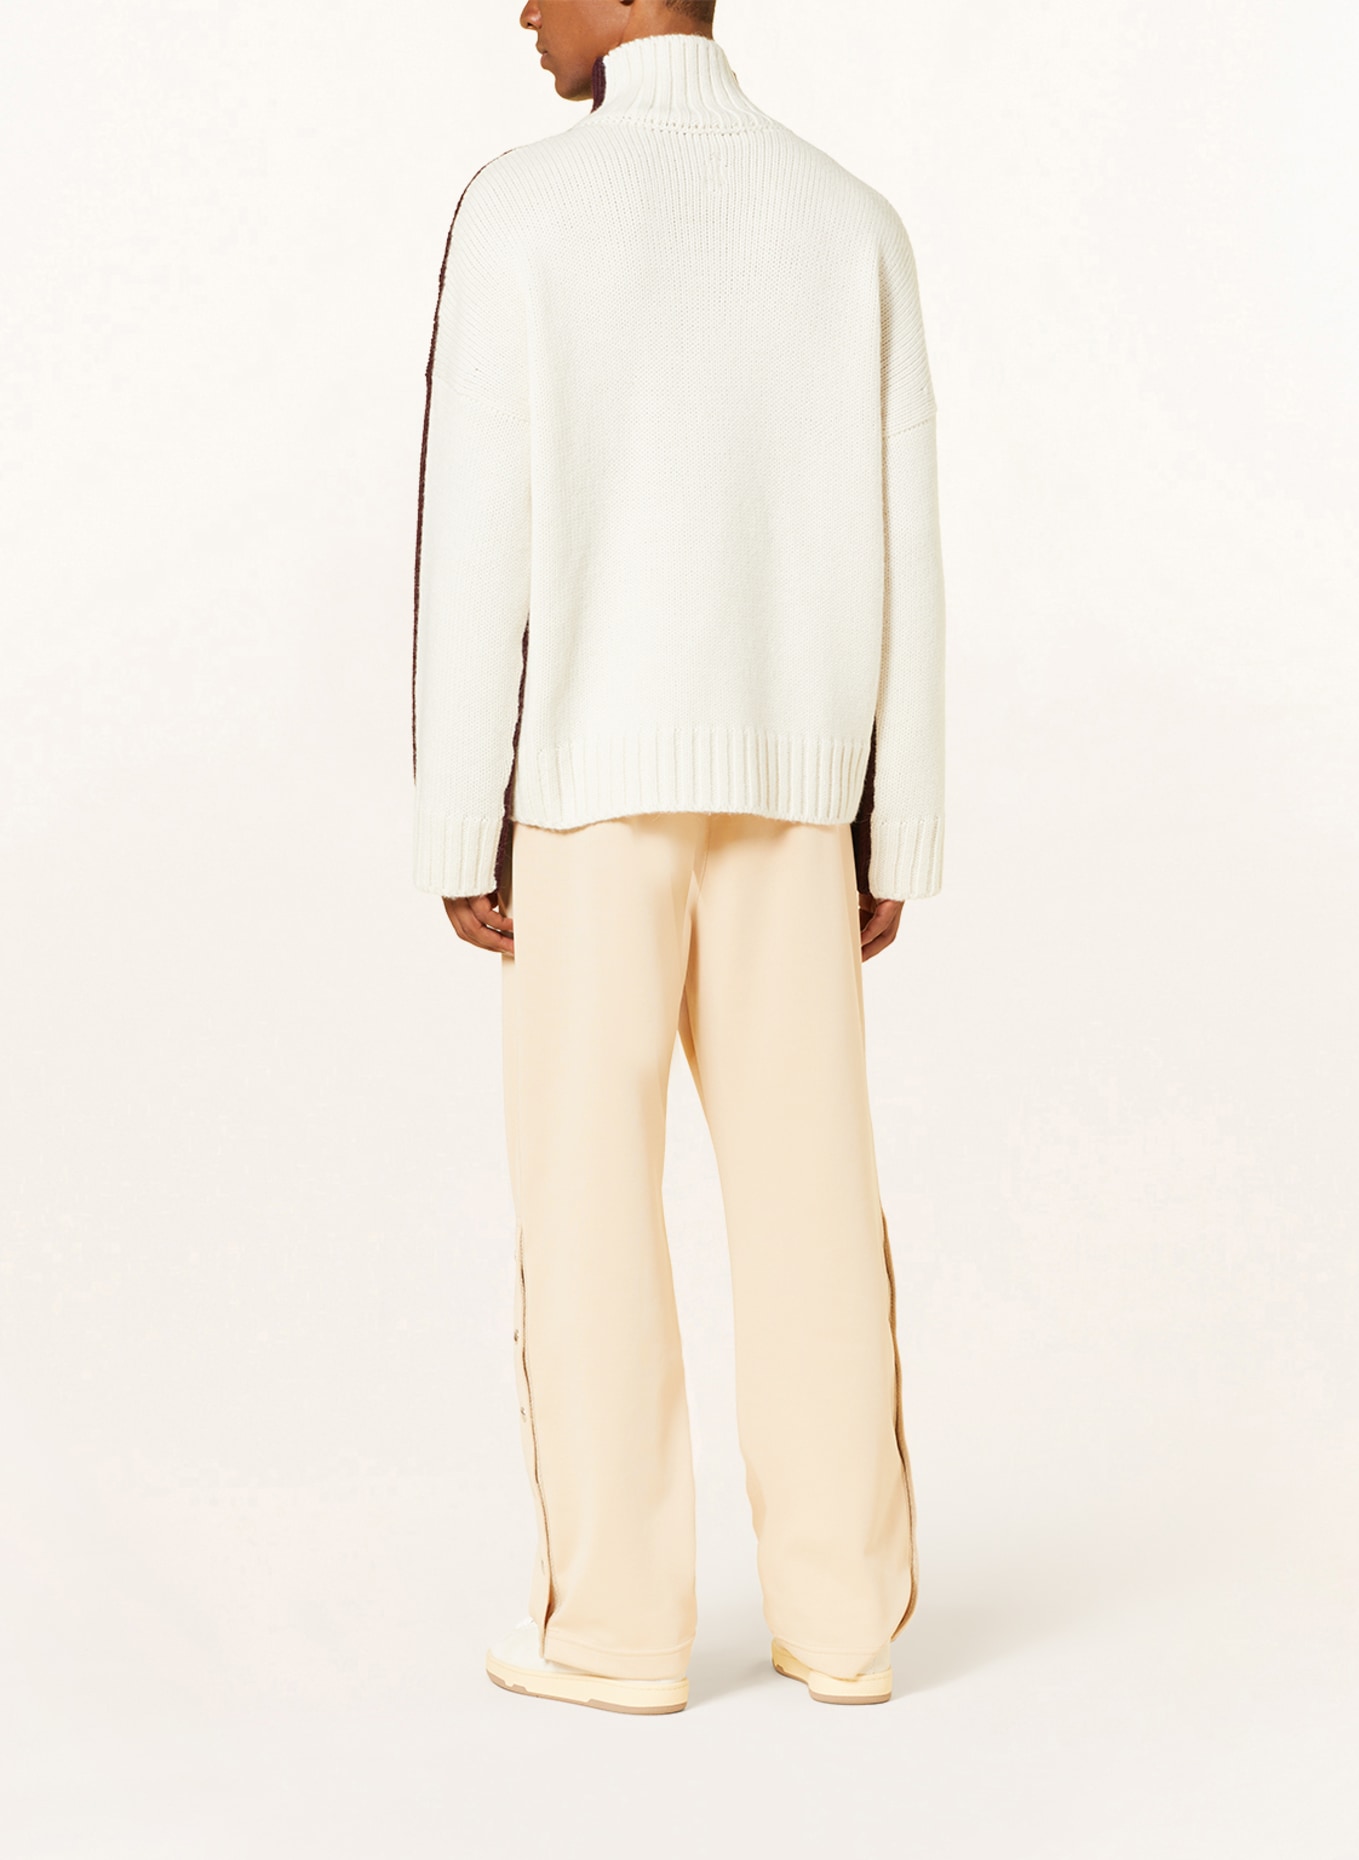 JW ANDERSON Sweater with alpaca, Color: DARK RED/ WHITE (Image 3)